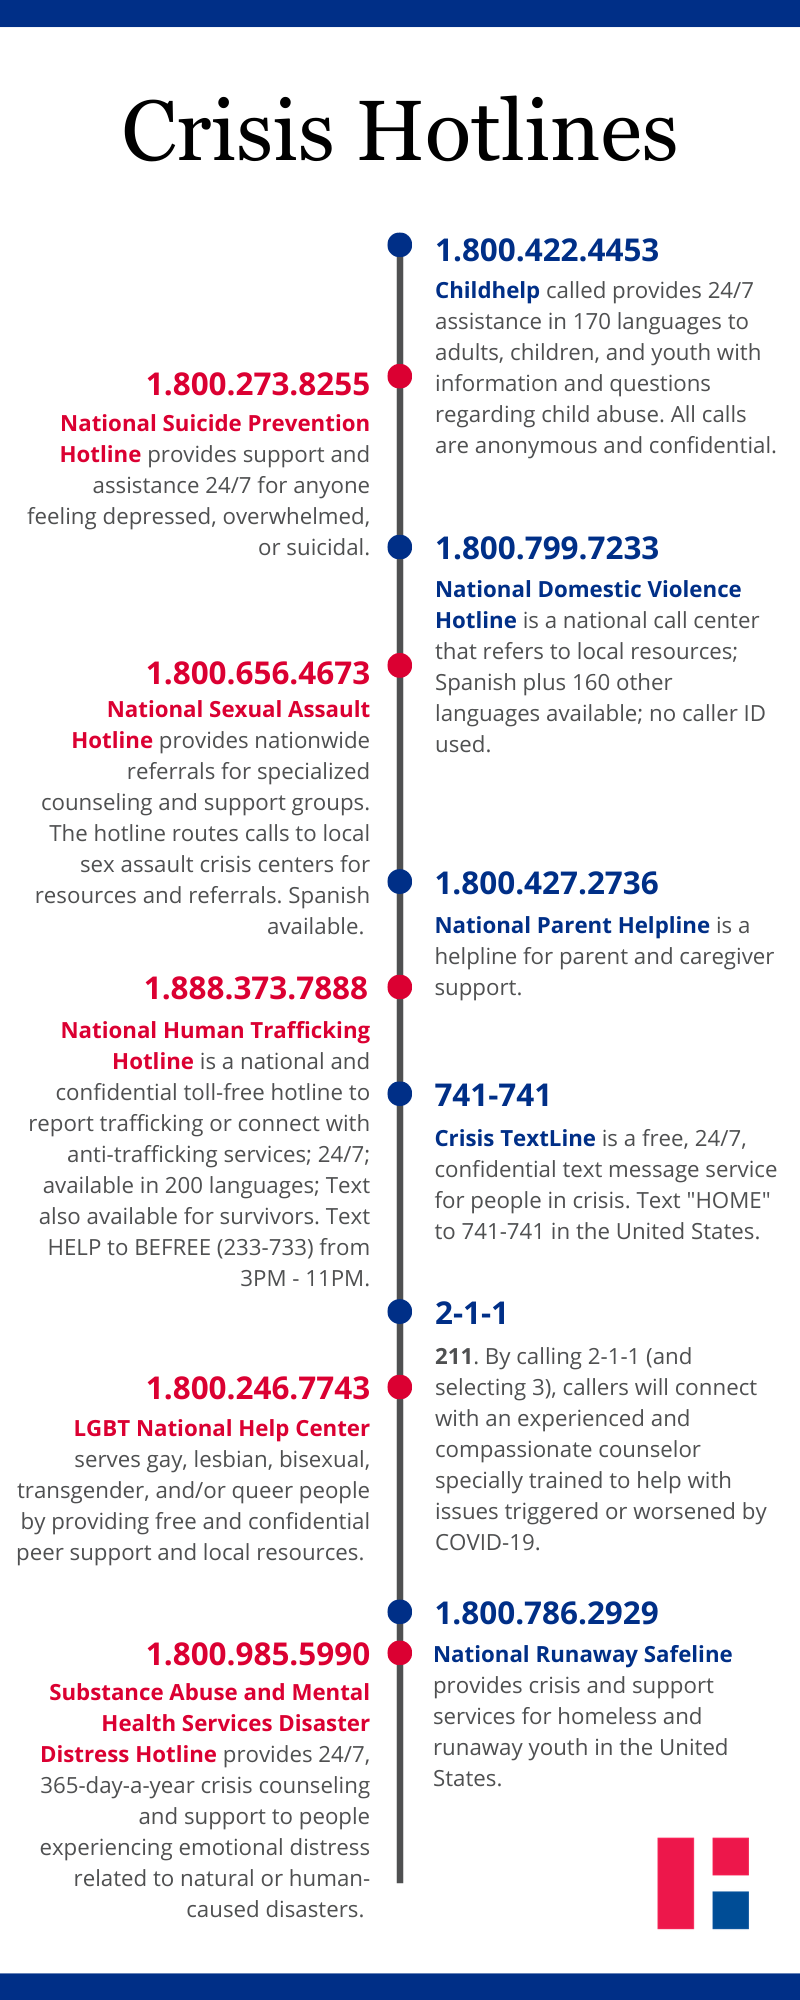 Crisis-Hotline-Infographic-Update.png